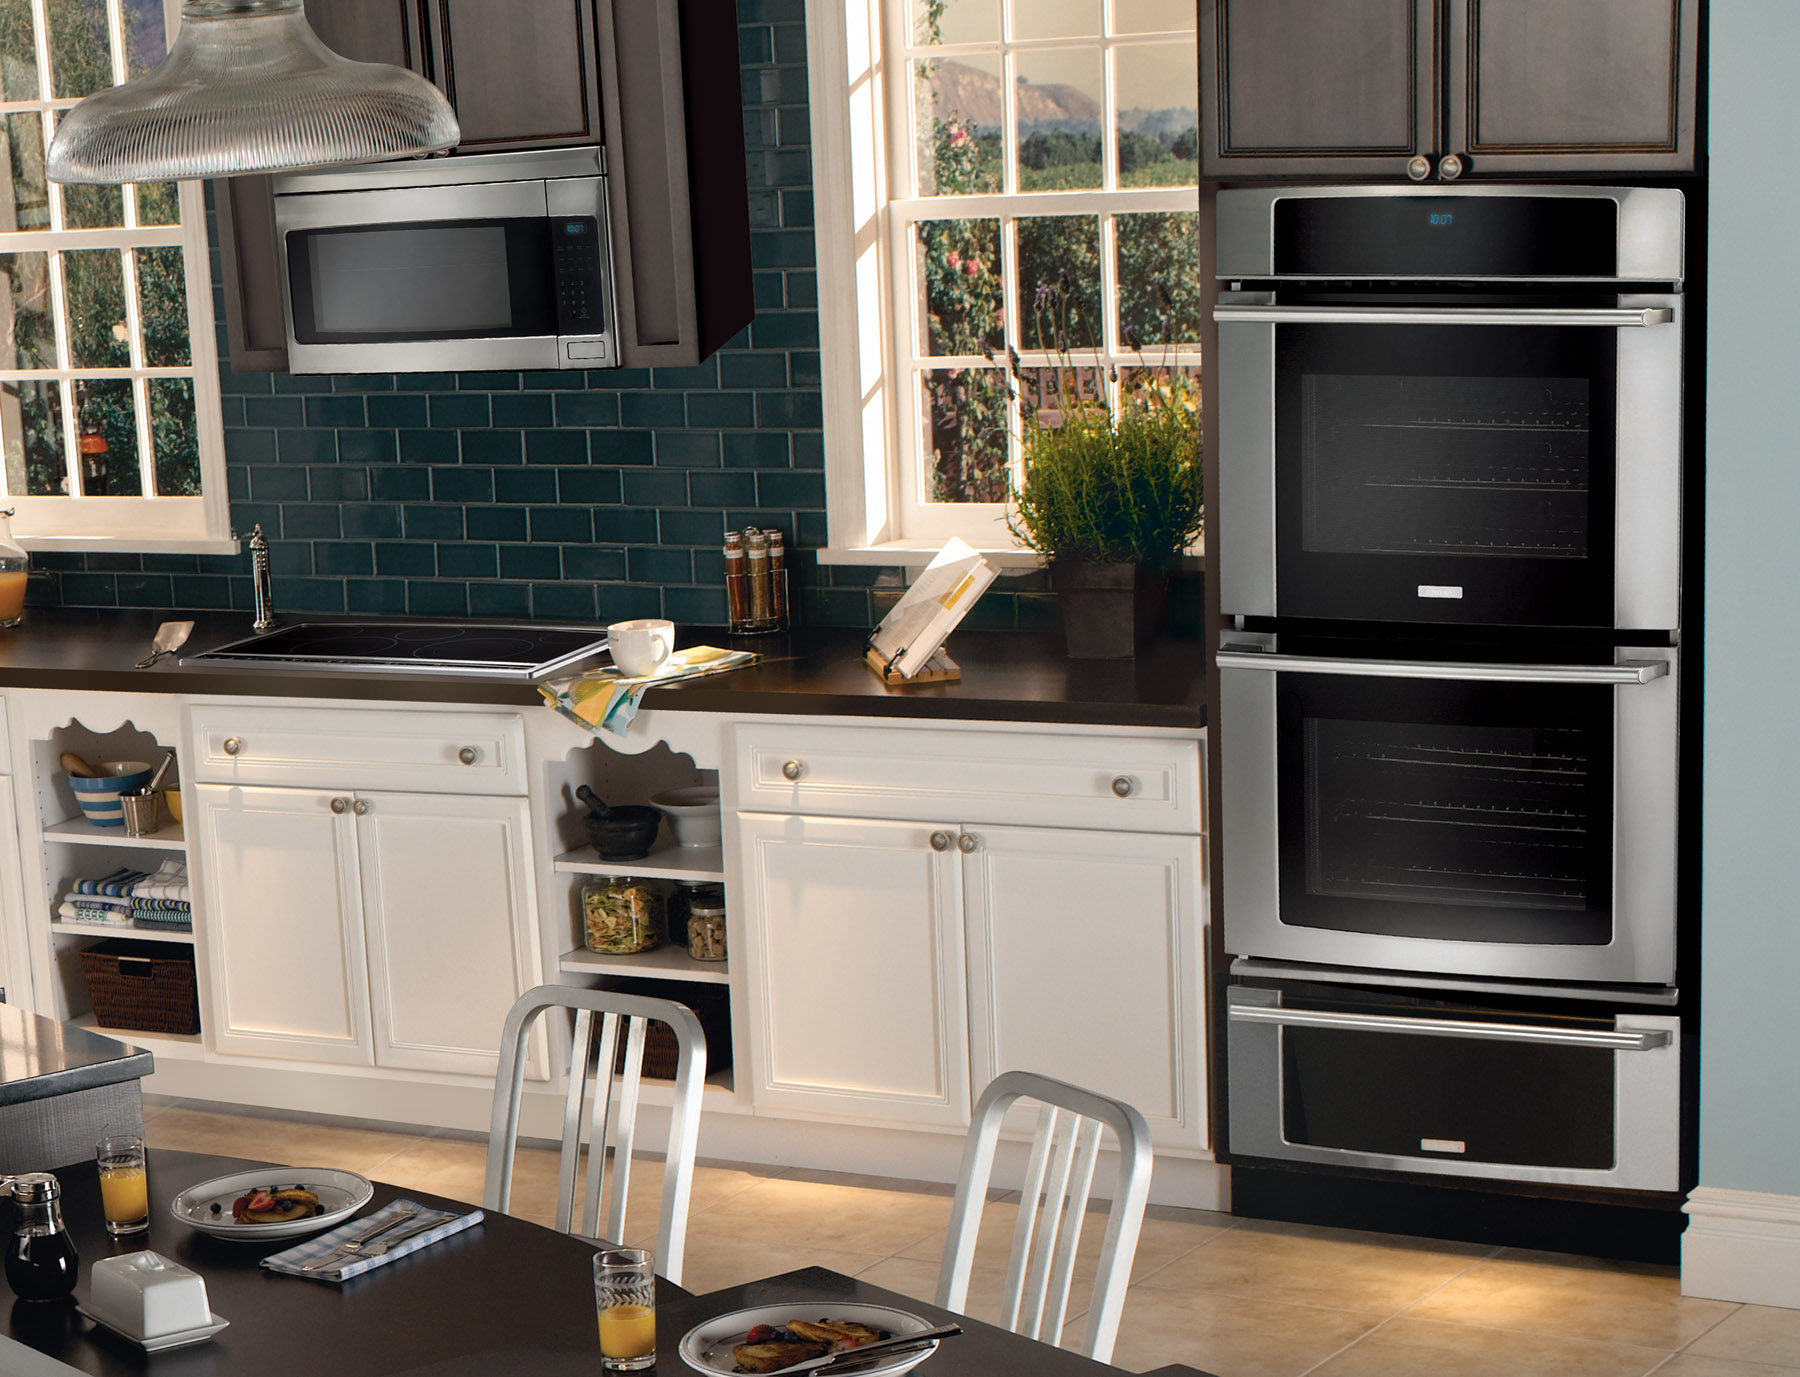 Dreaming of a Smarter Oven?